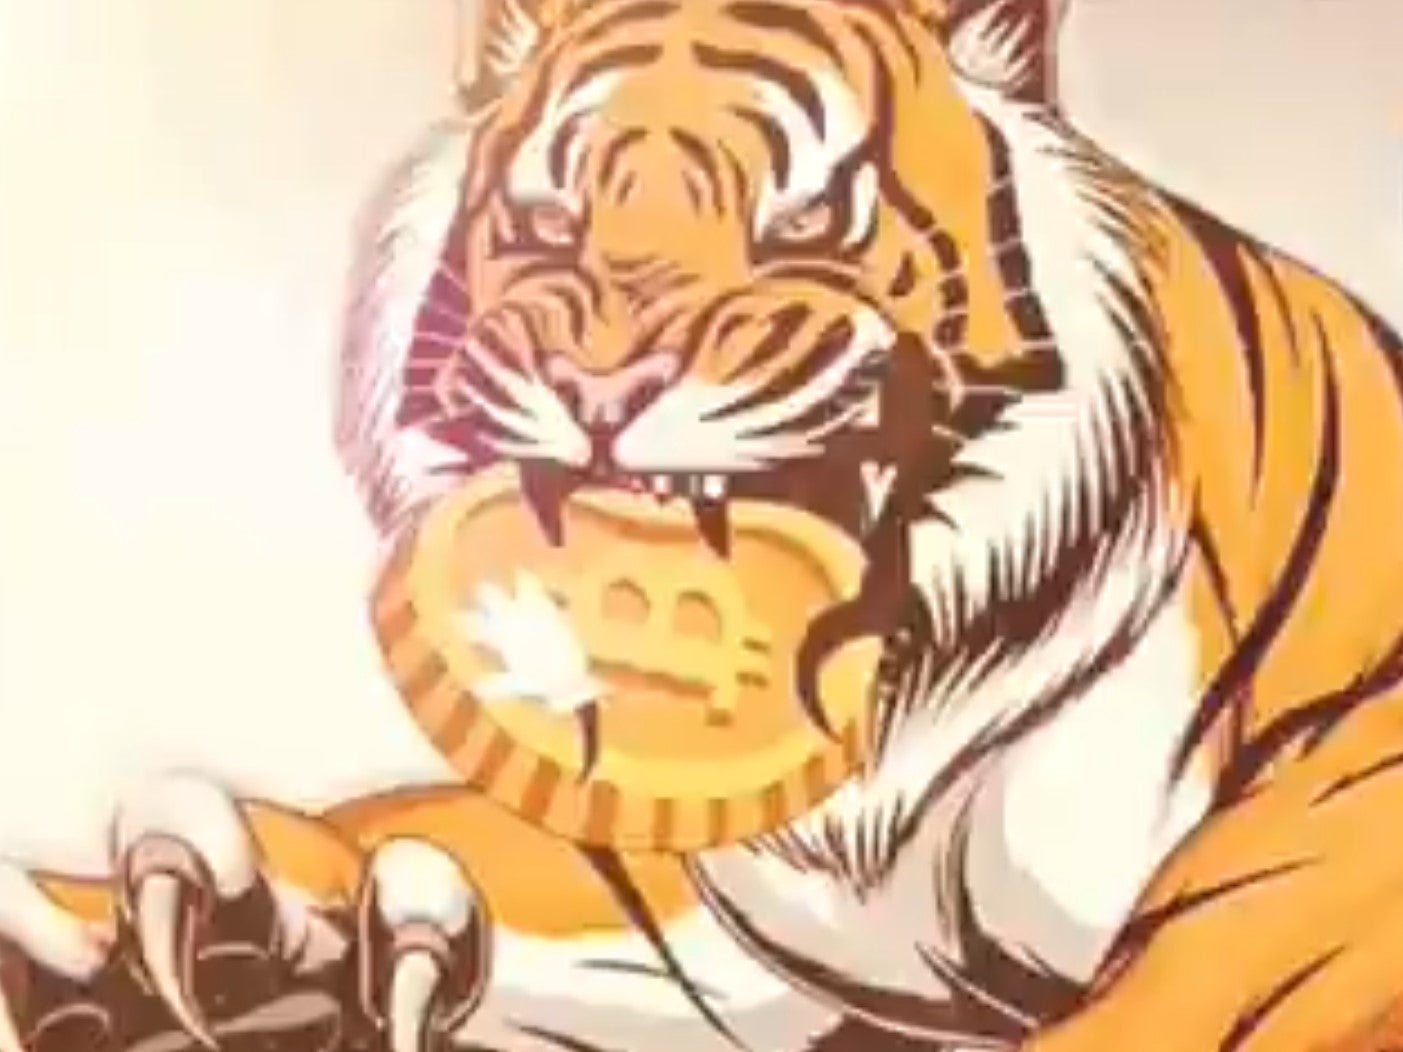 A promotional image used by the obscure cryptocurrency Tiger King Coin